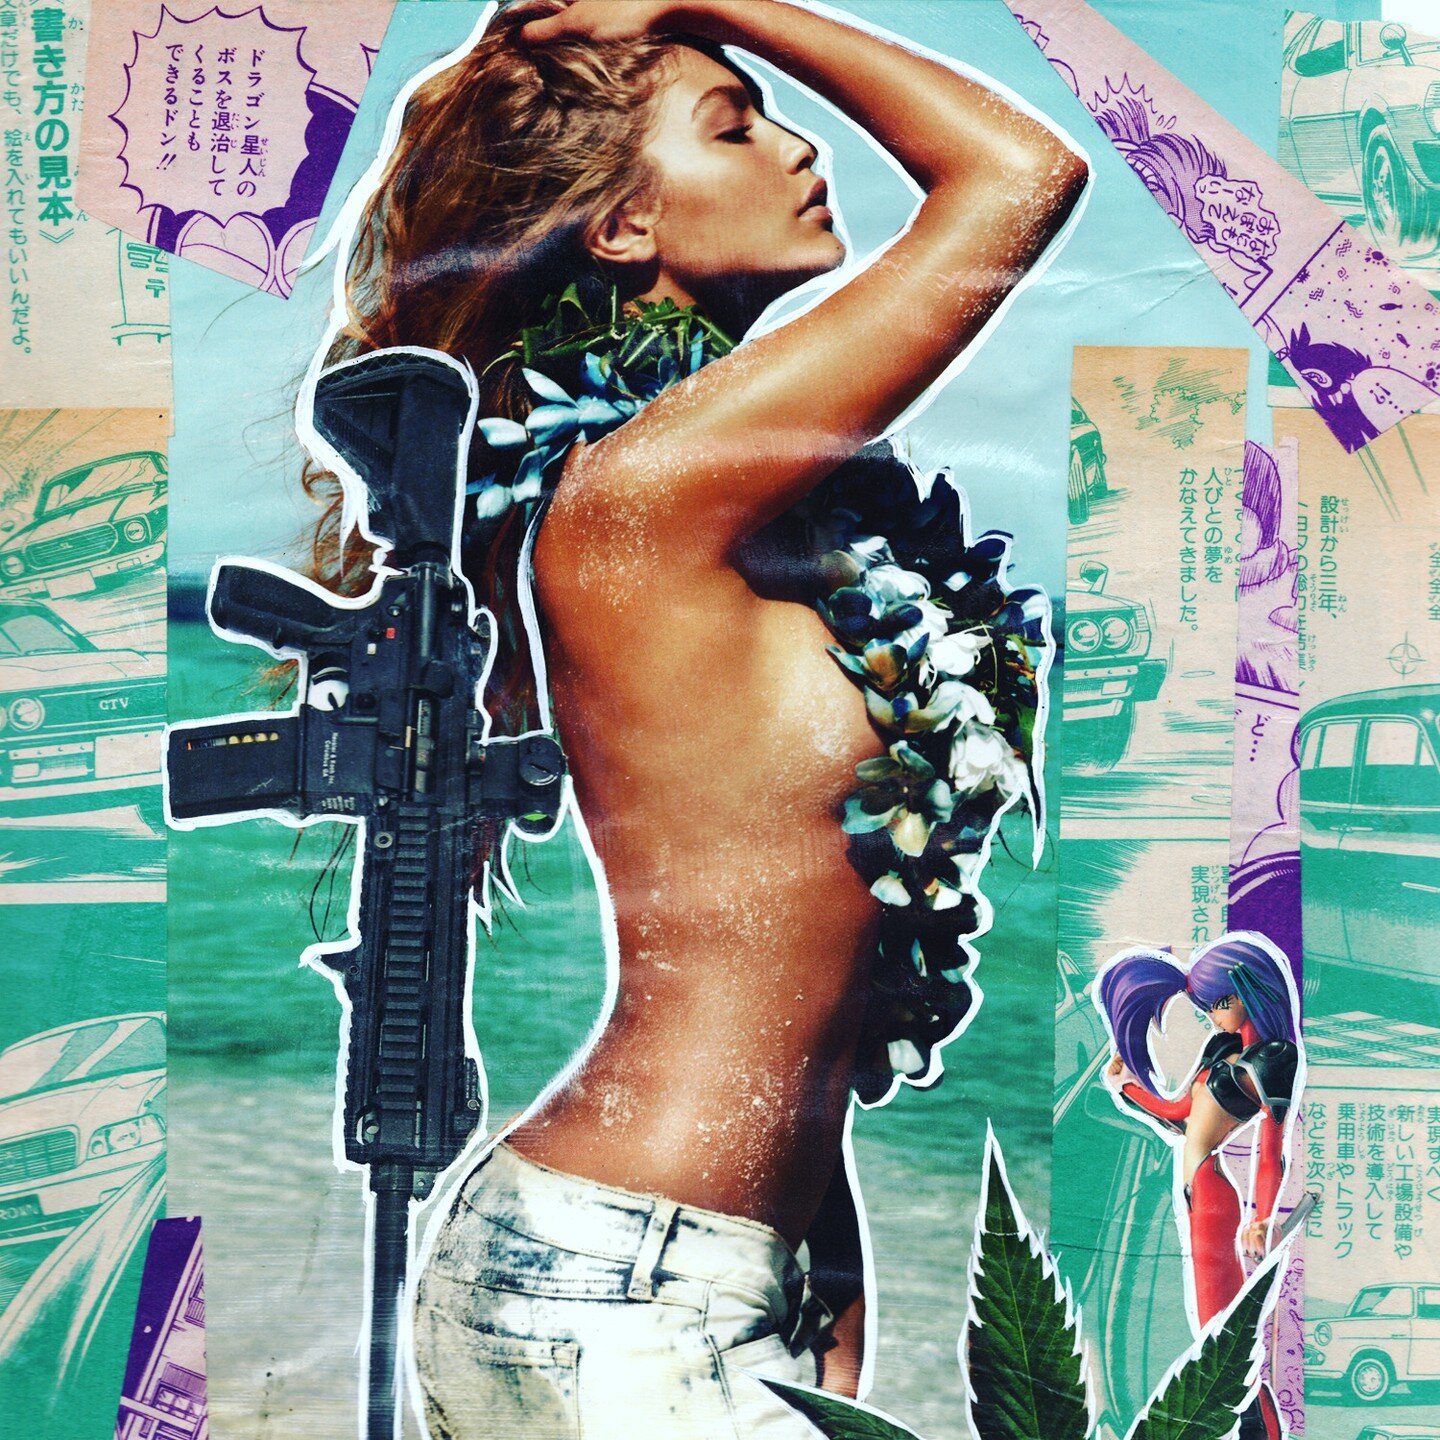 &quot;Guess what? That's what!&quot; Collage art by Espo71. #supermodels #gunmodels #ar15 #420 #guess #collageart #collageartipunkrockart #surrealism #punkrockart